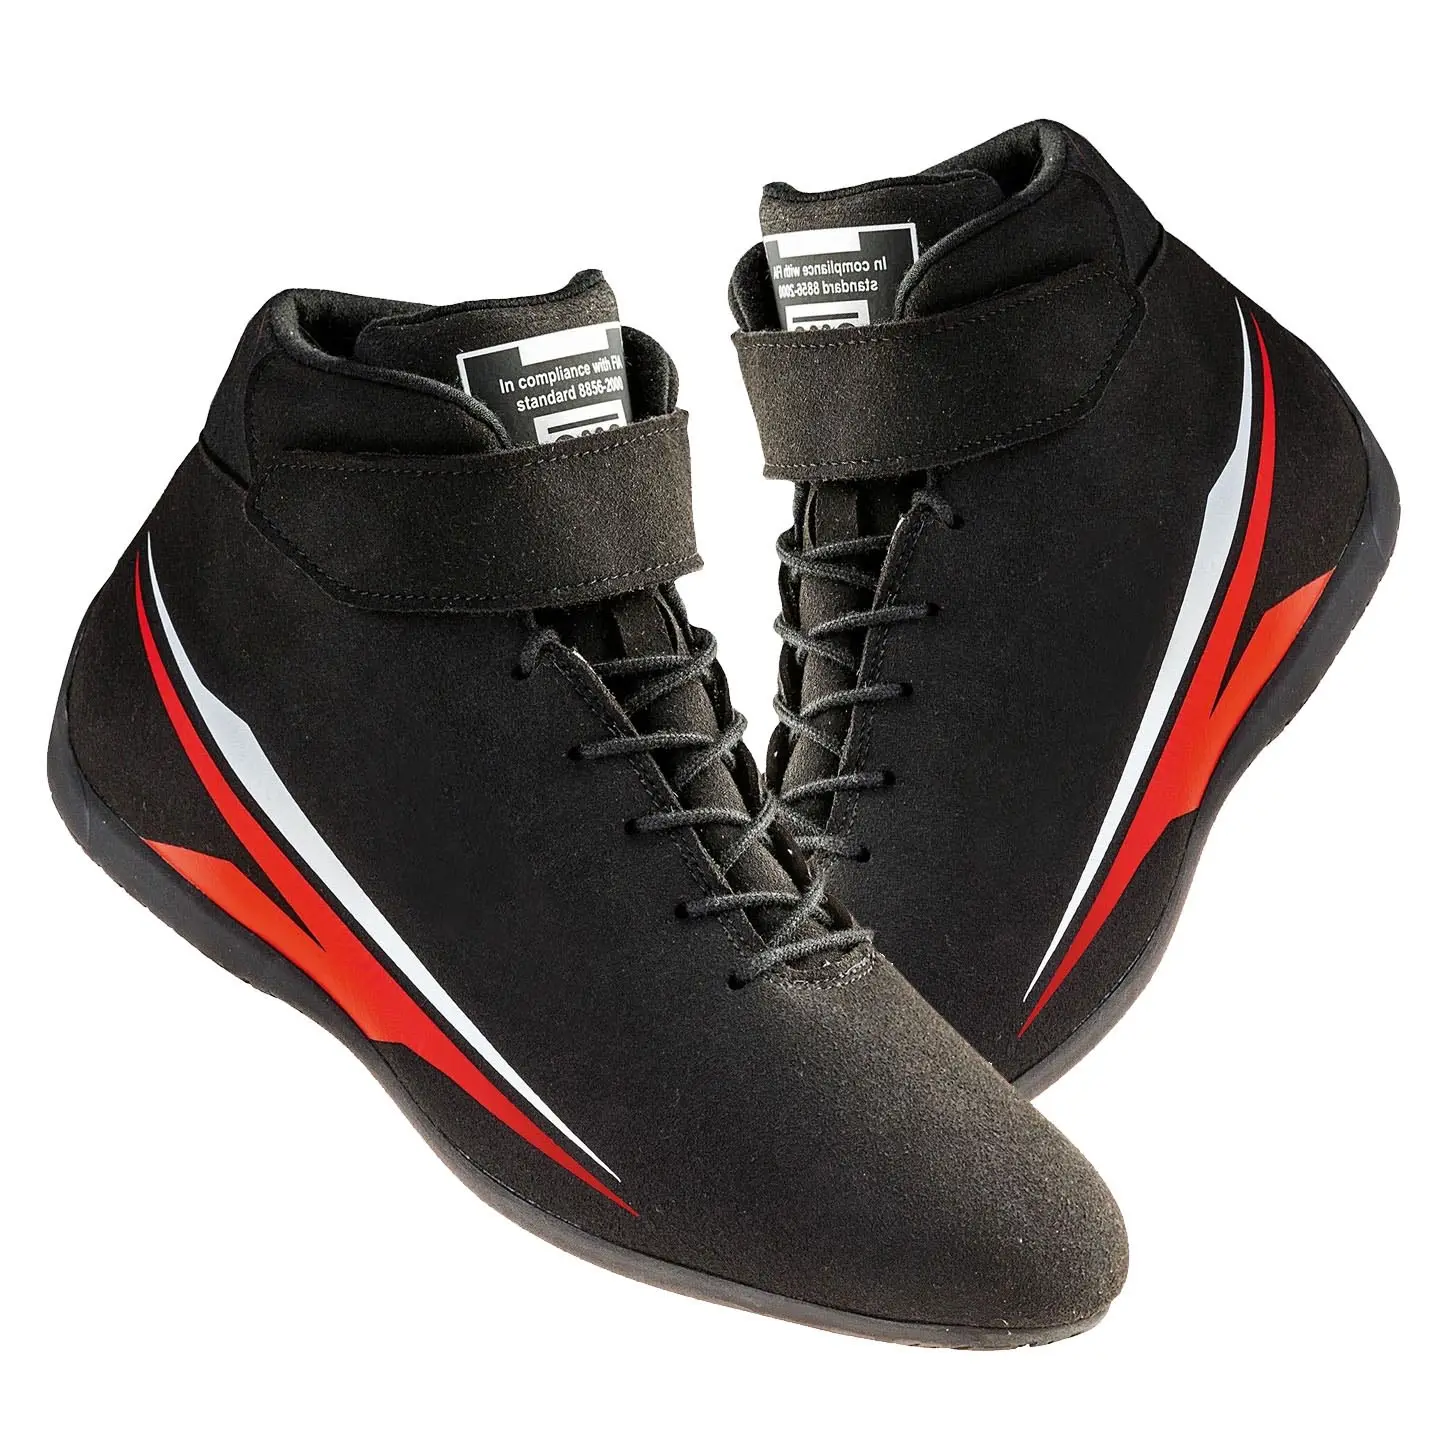 Latest Karting Boots Racing Shoes Motorsport Boots Made of Leather Adult & Kids Sizes available